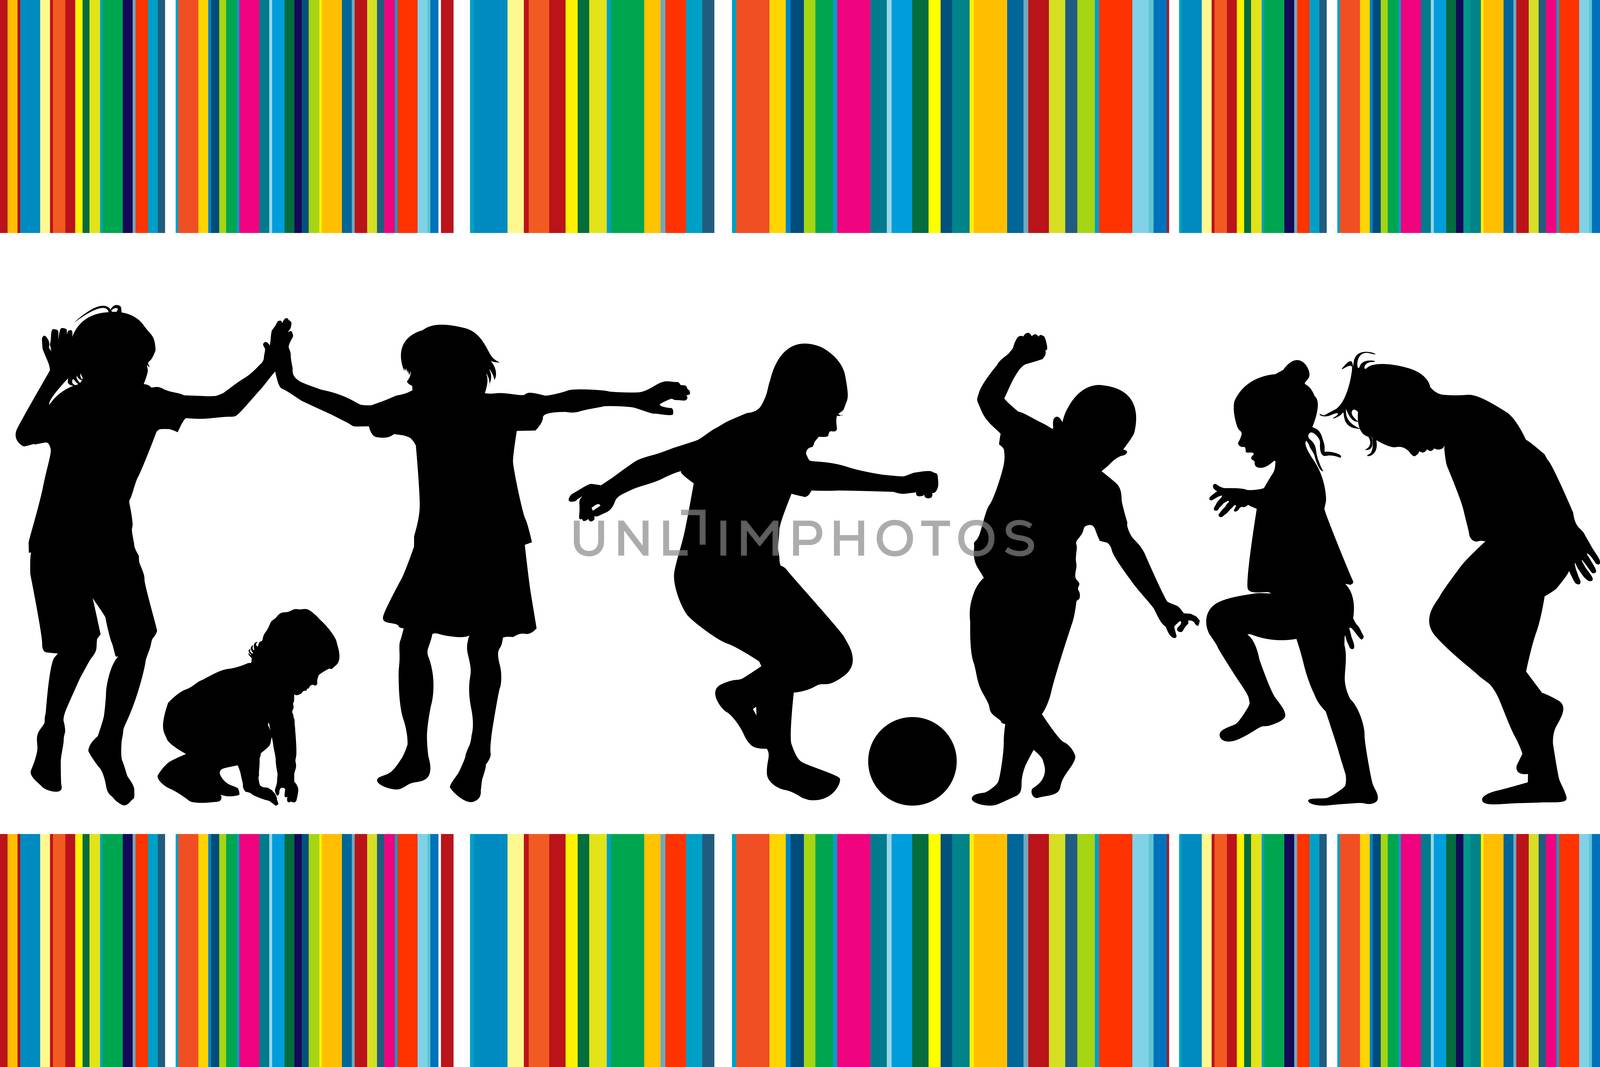 Card with silhouettes of children playing and colored stripes by hibrida13